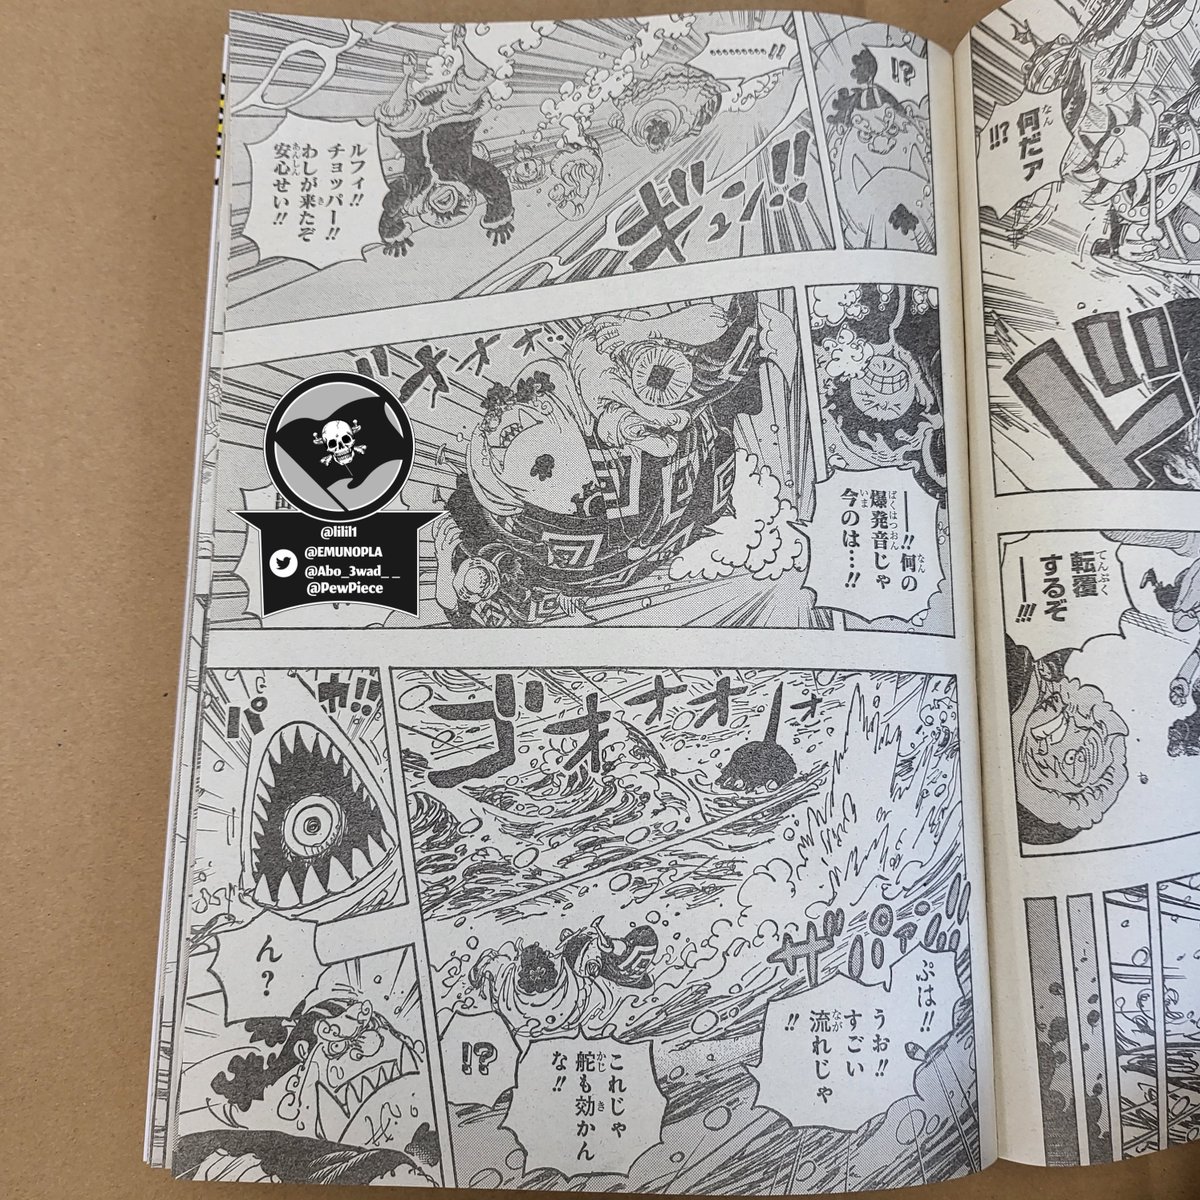 Spoiler - One Piece Chapter 1061 Spoilers Discussion, Page 14